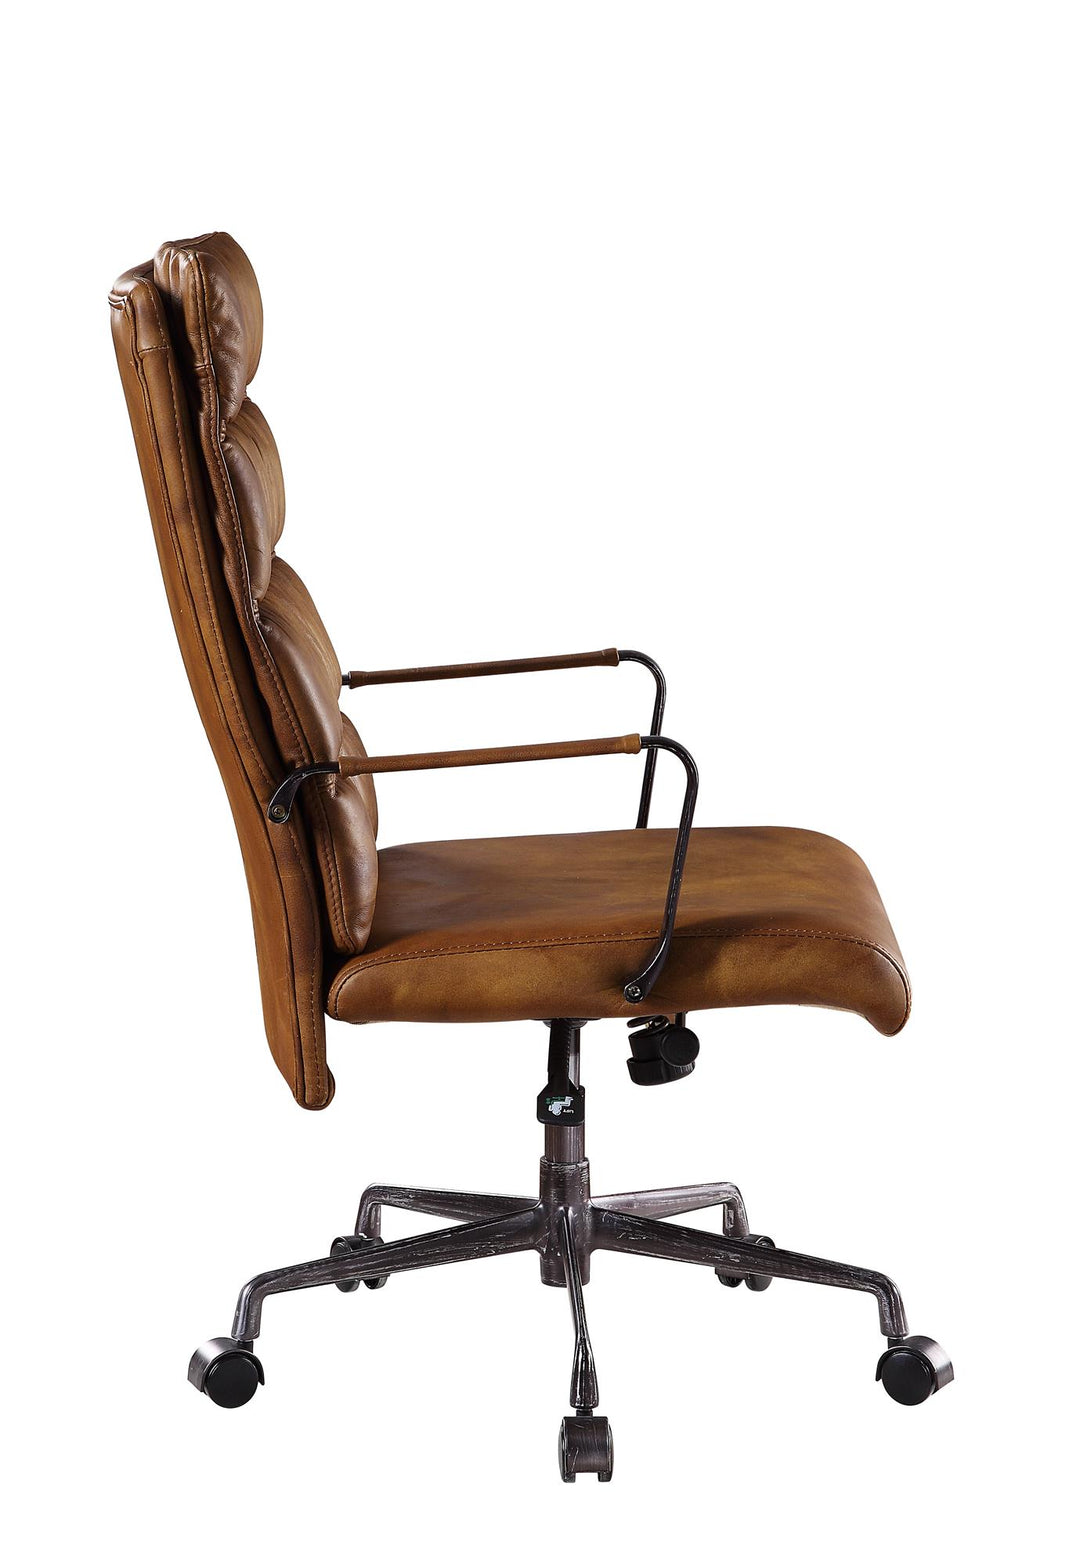 Executive Swivel Office Chair with adjustable height - Brown